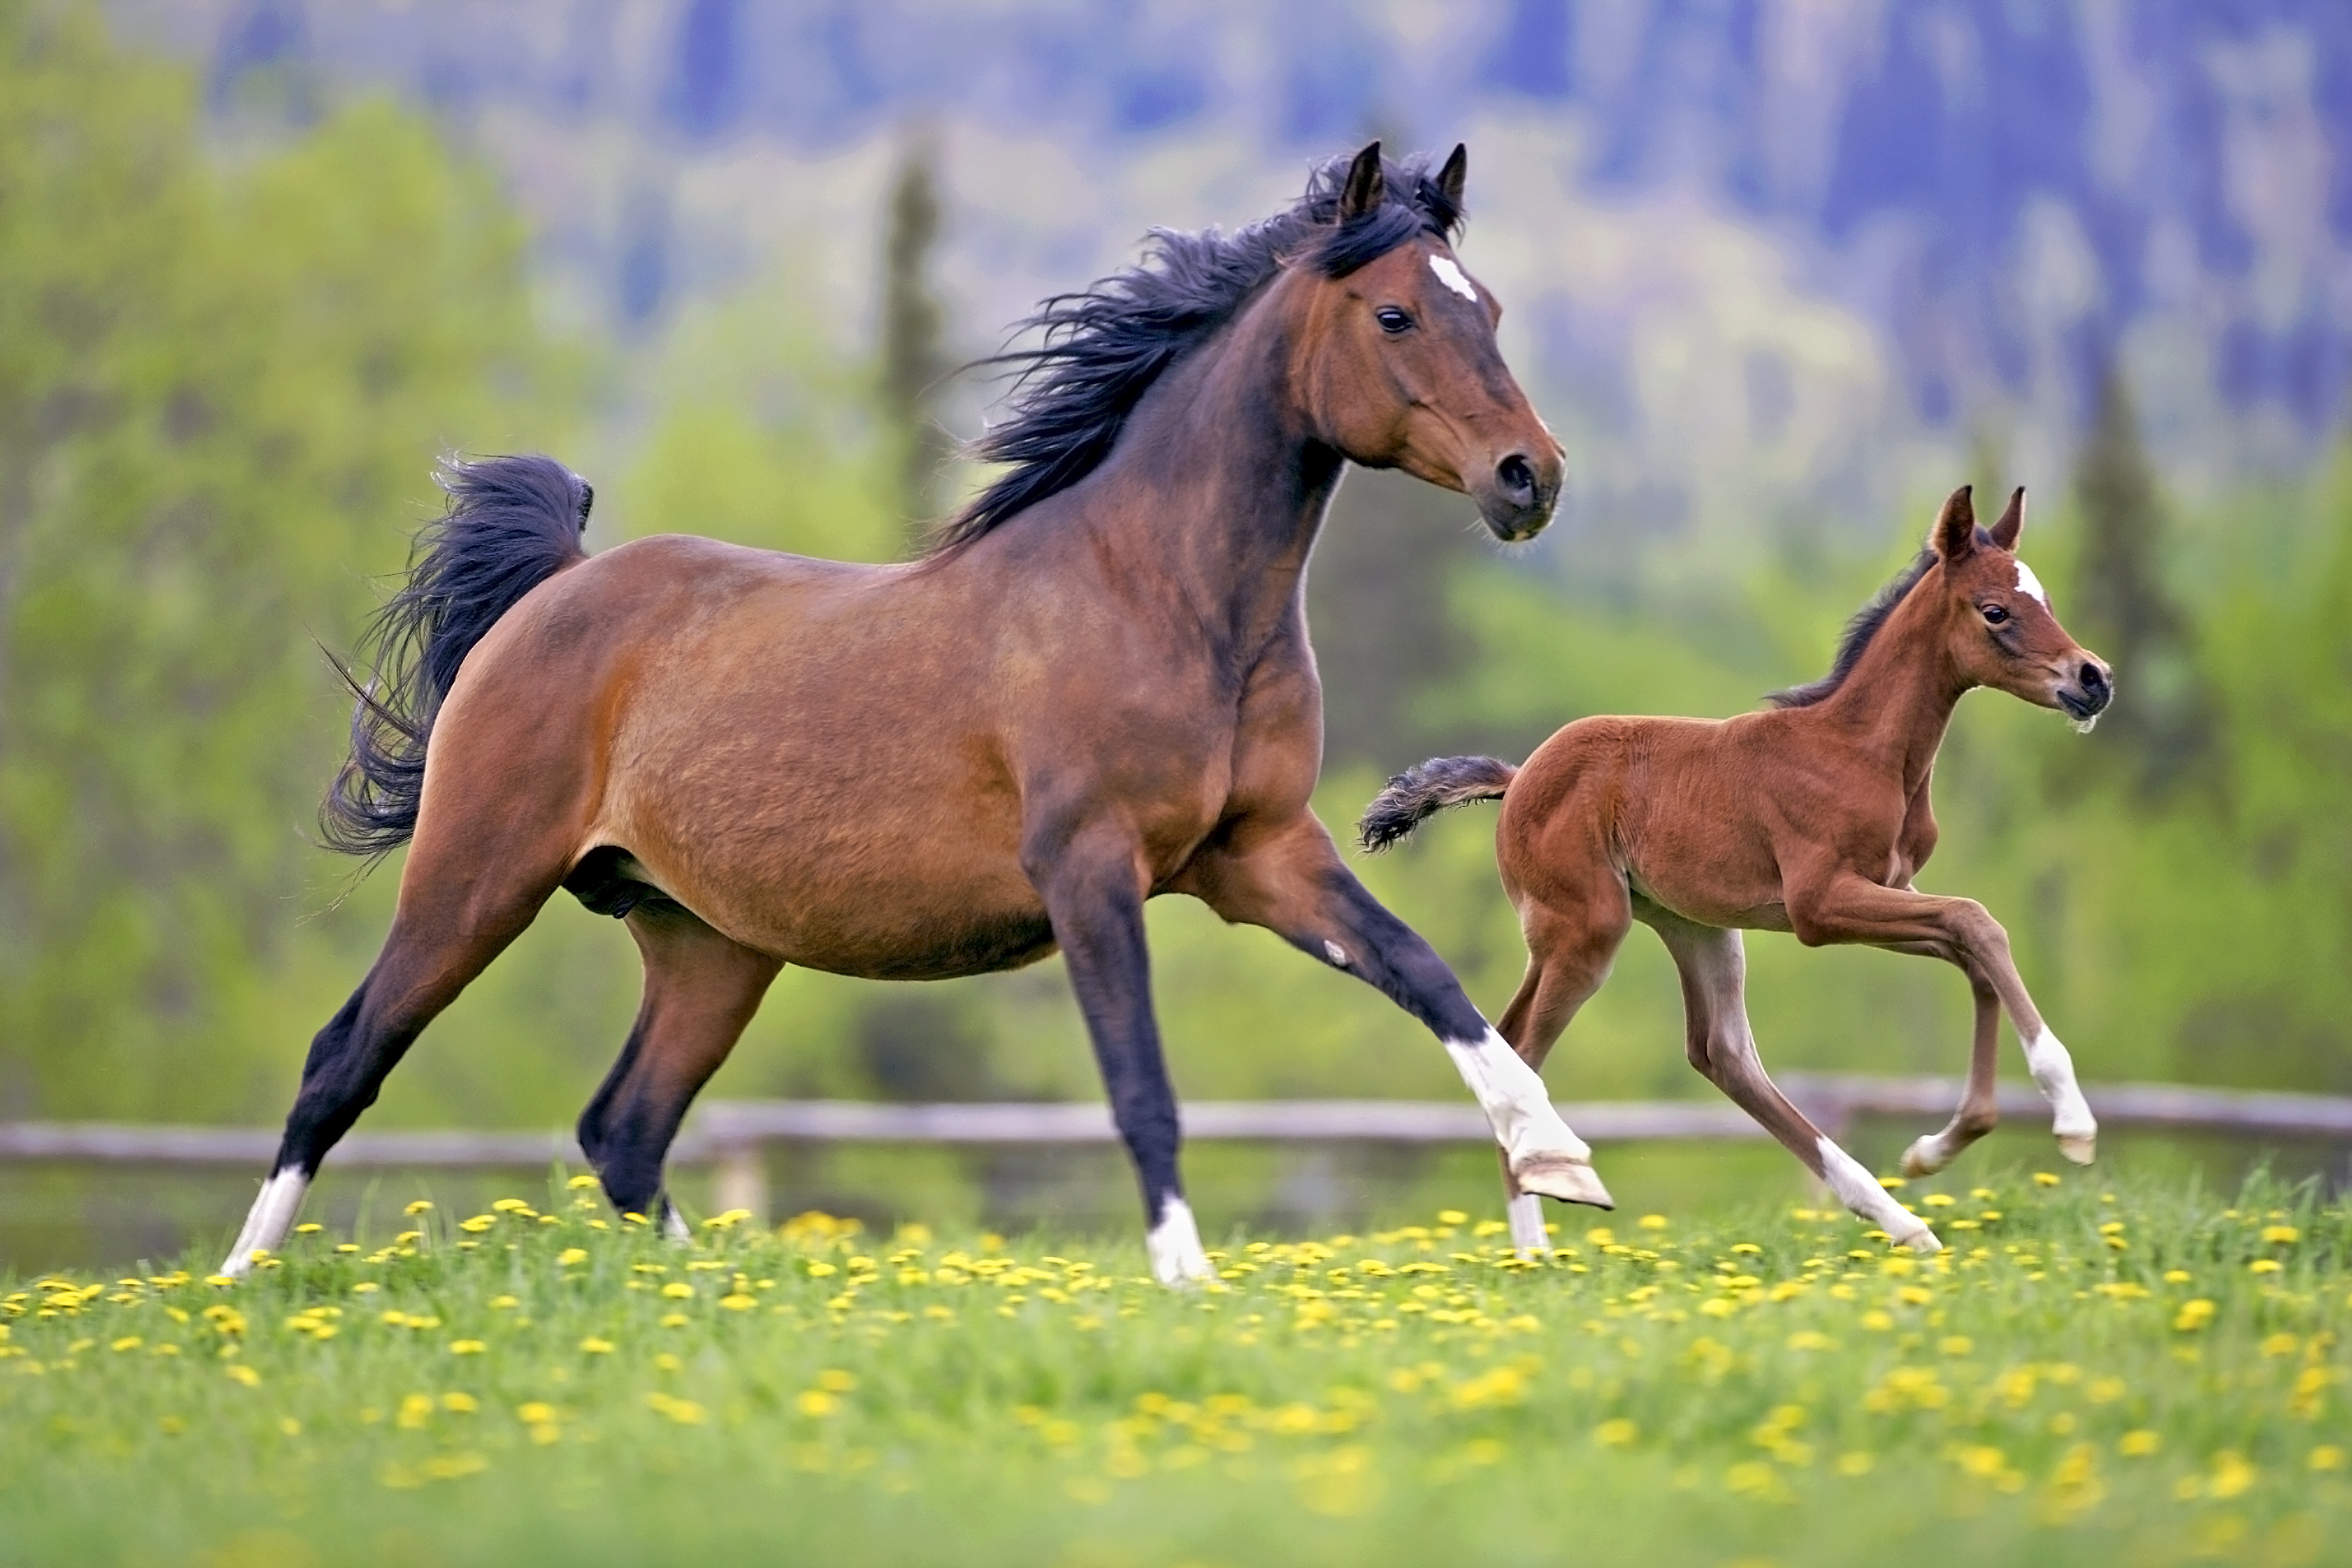 A mare and foal running in a field 